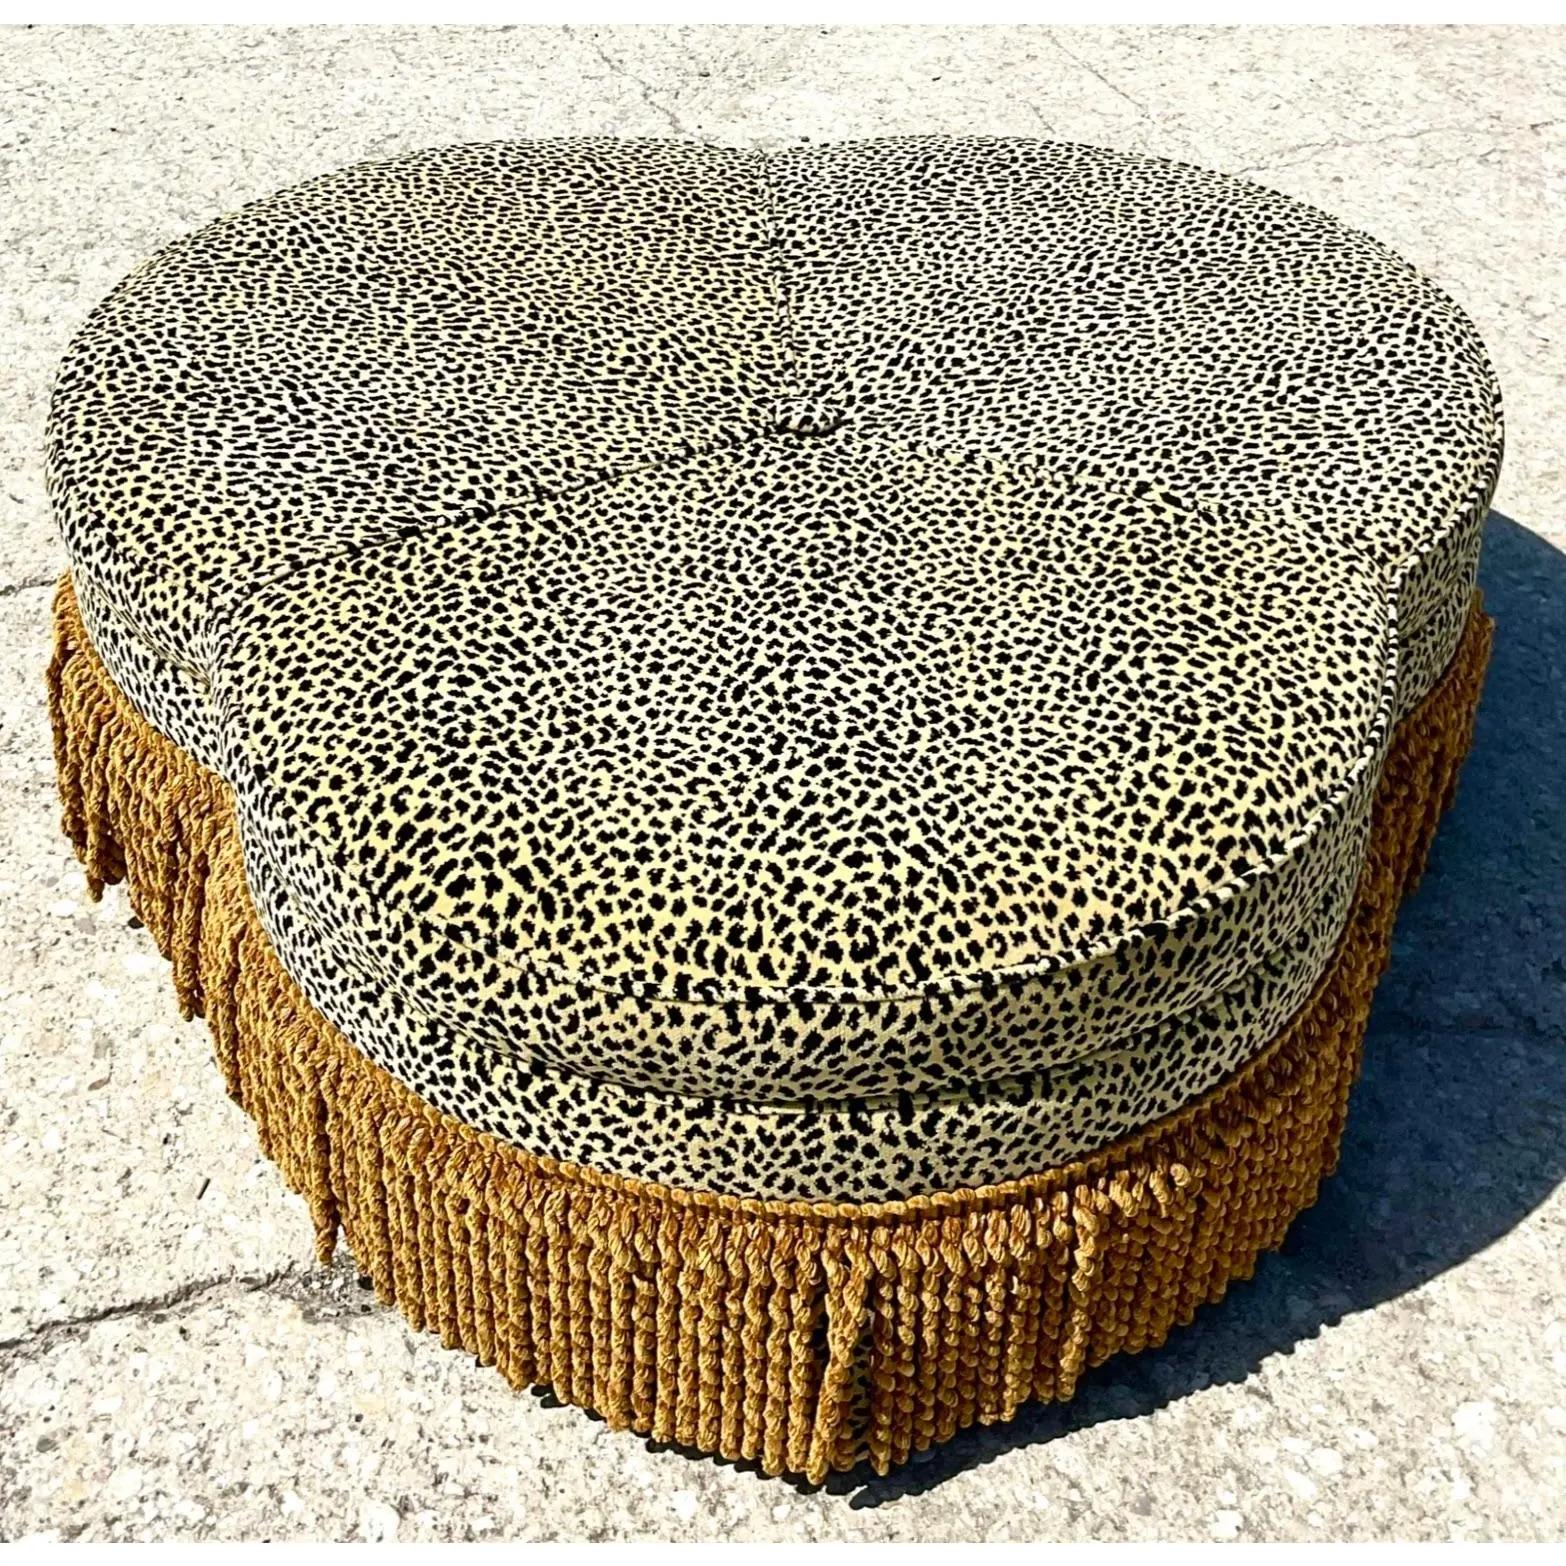 Fantastic vintage Regency ottoman. Beautiful clover leaf shape covered in a velveteen leopard. A thick twisted fringe runs along the bottom. Perfect as an ottoman or glamorous coffee table. You decide! Acquired from a Naples estate.